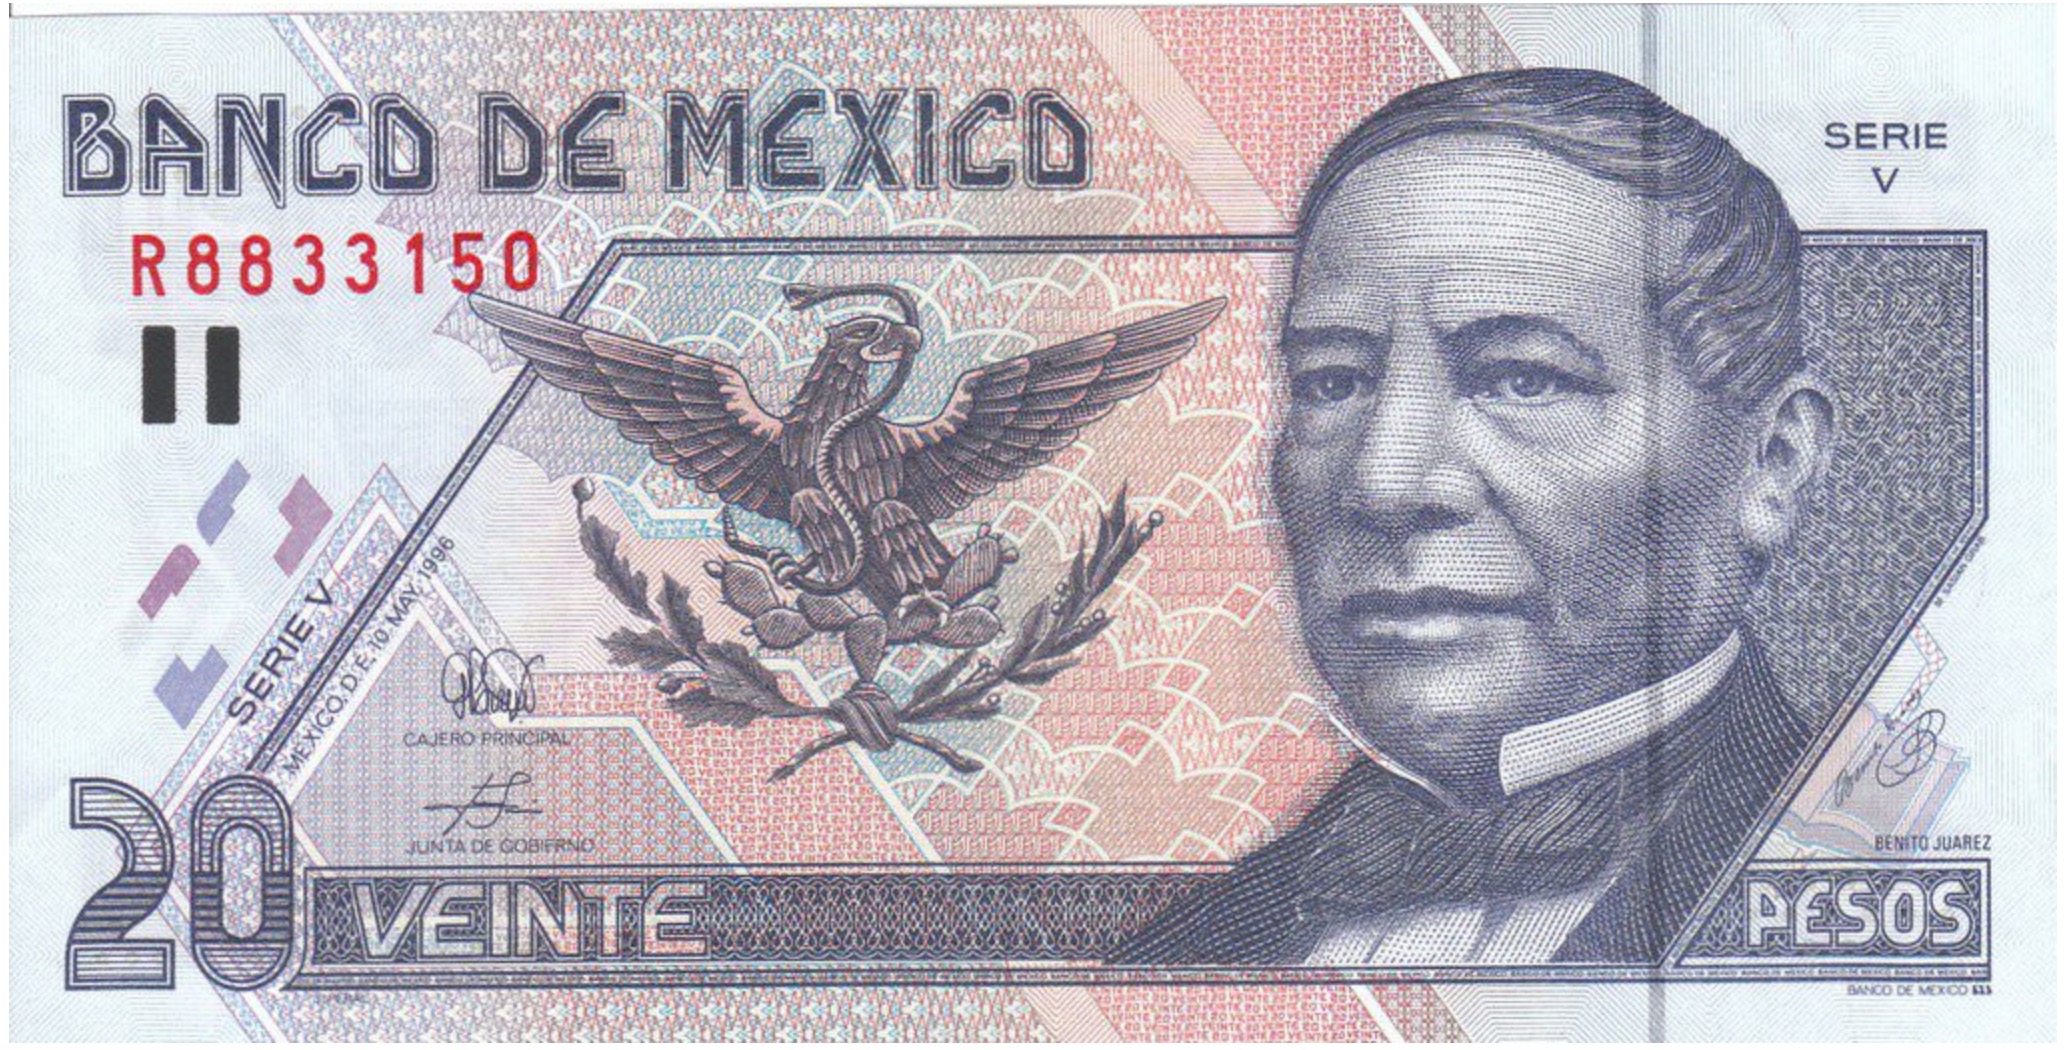 500 Mexican Pesos banknote (Series D) - Exchange yours for cash today